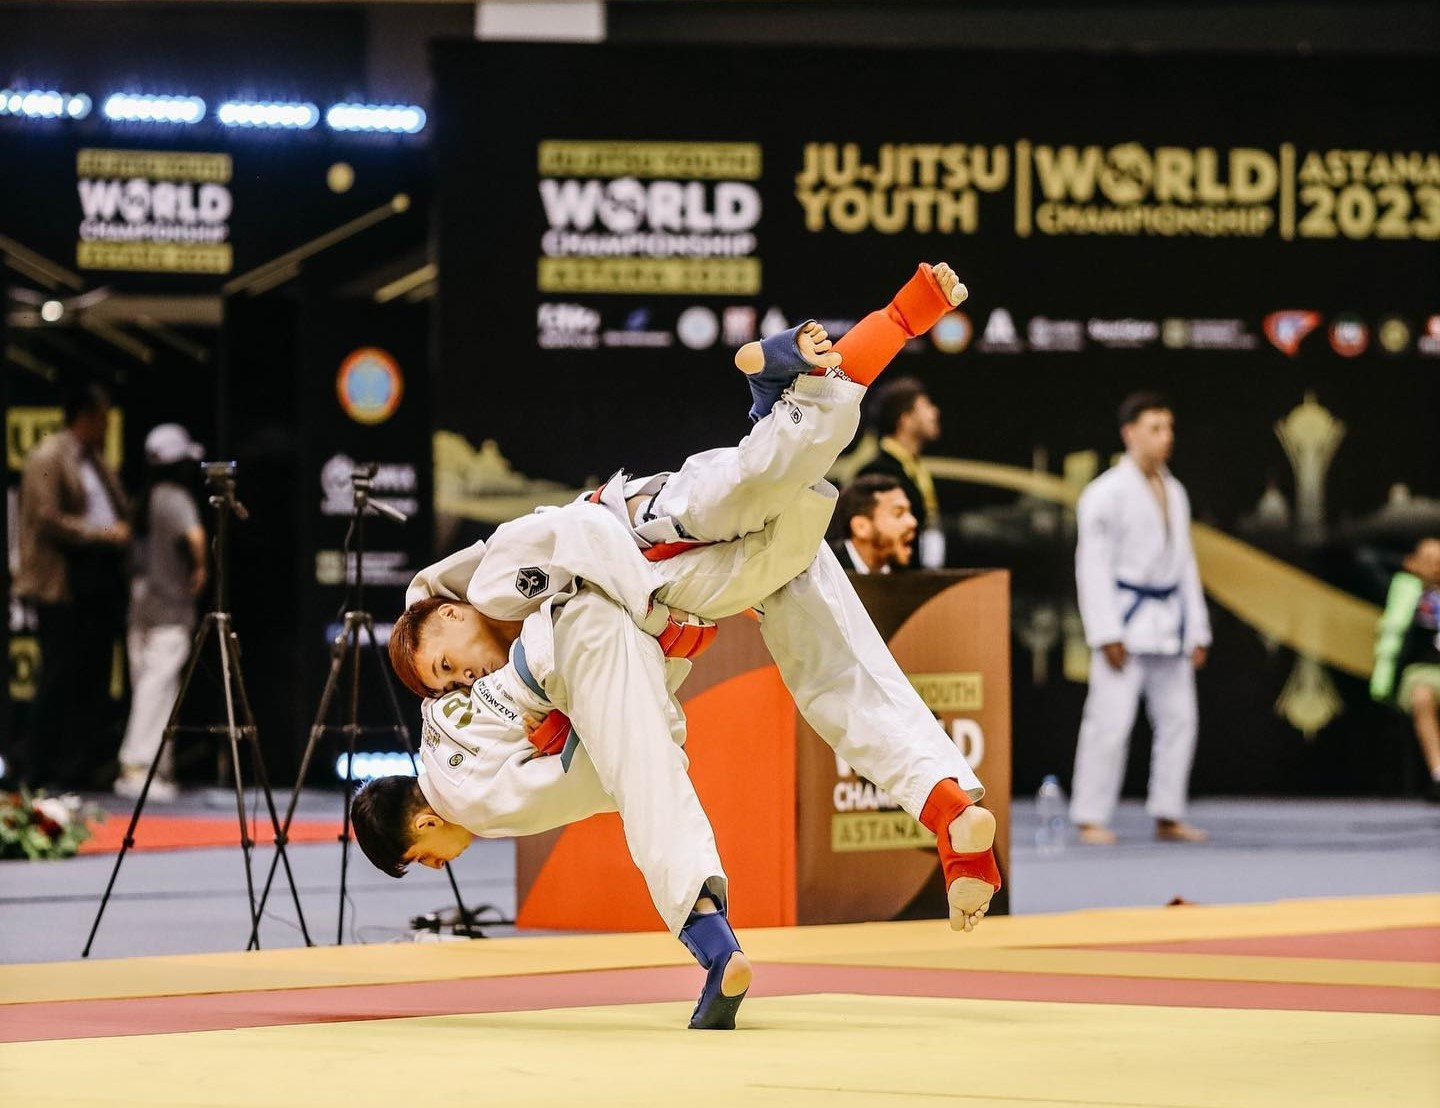 Kazakstan Ju-Jitsu Federation official praises Government support for youth event